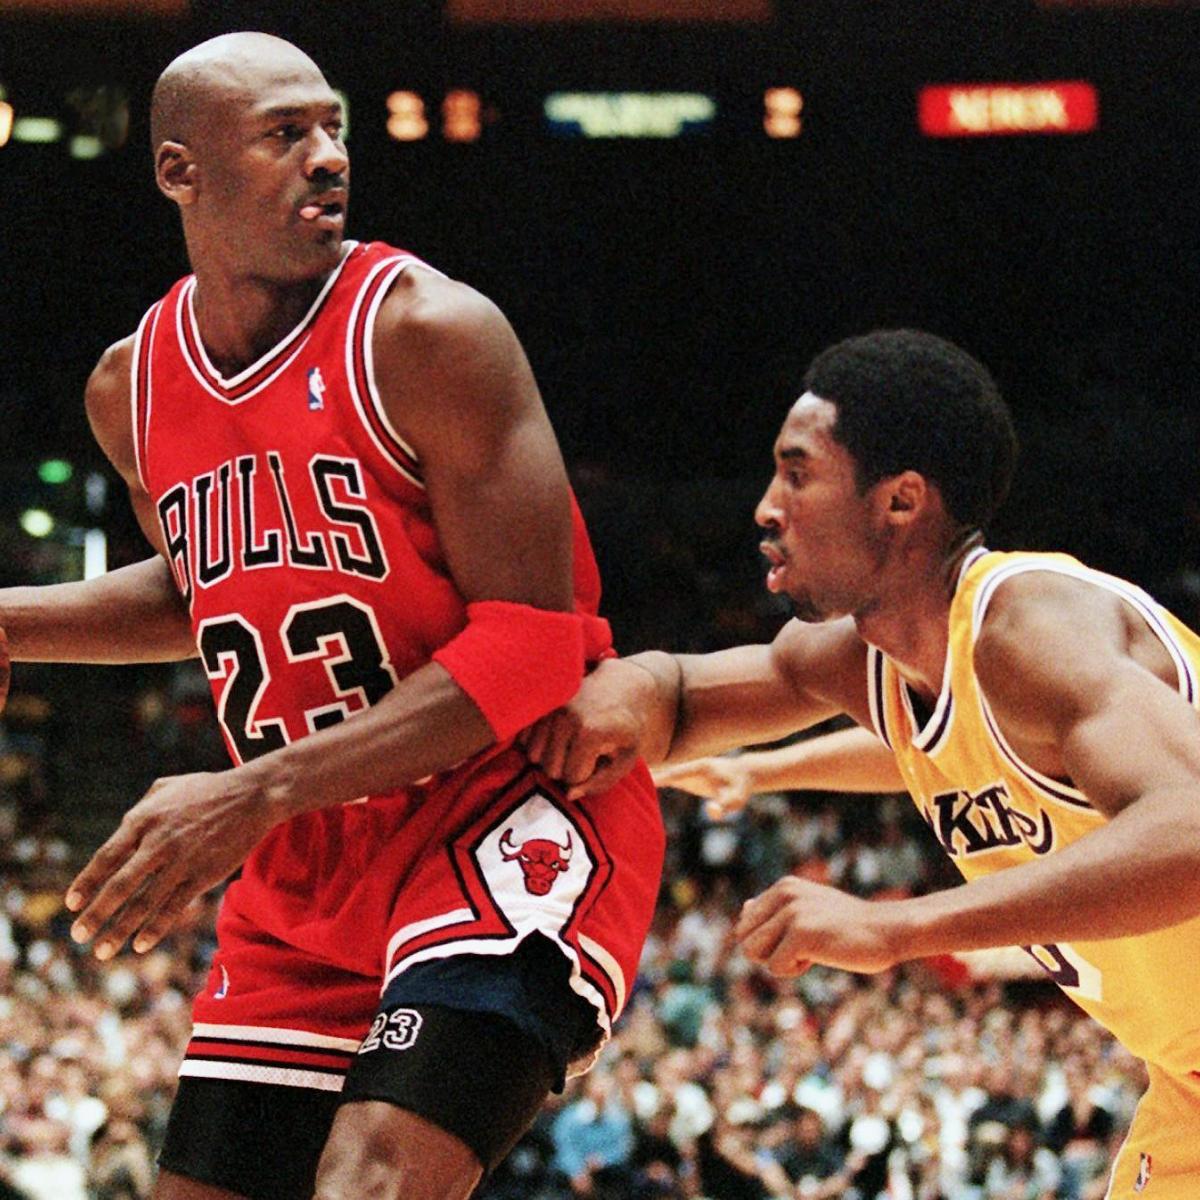 ESPN on X: On this date 28 years ago, Michael Jordan wore No. 12